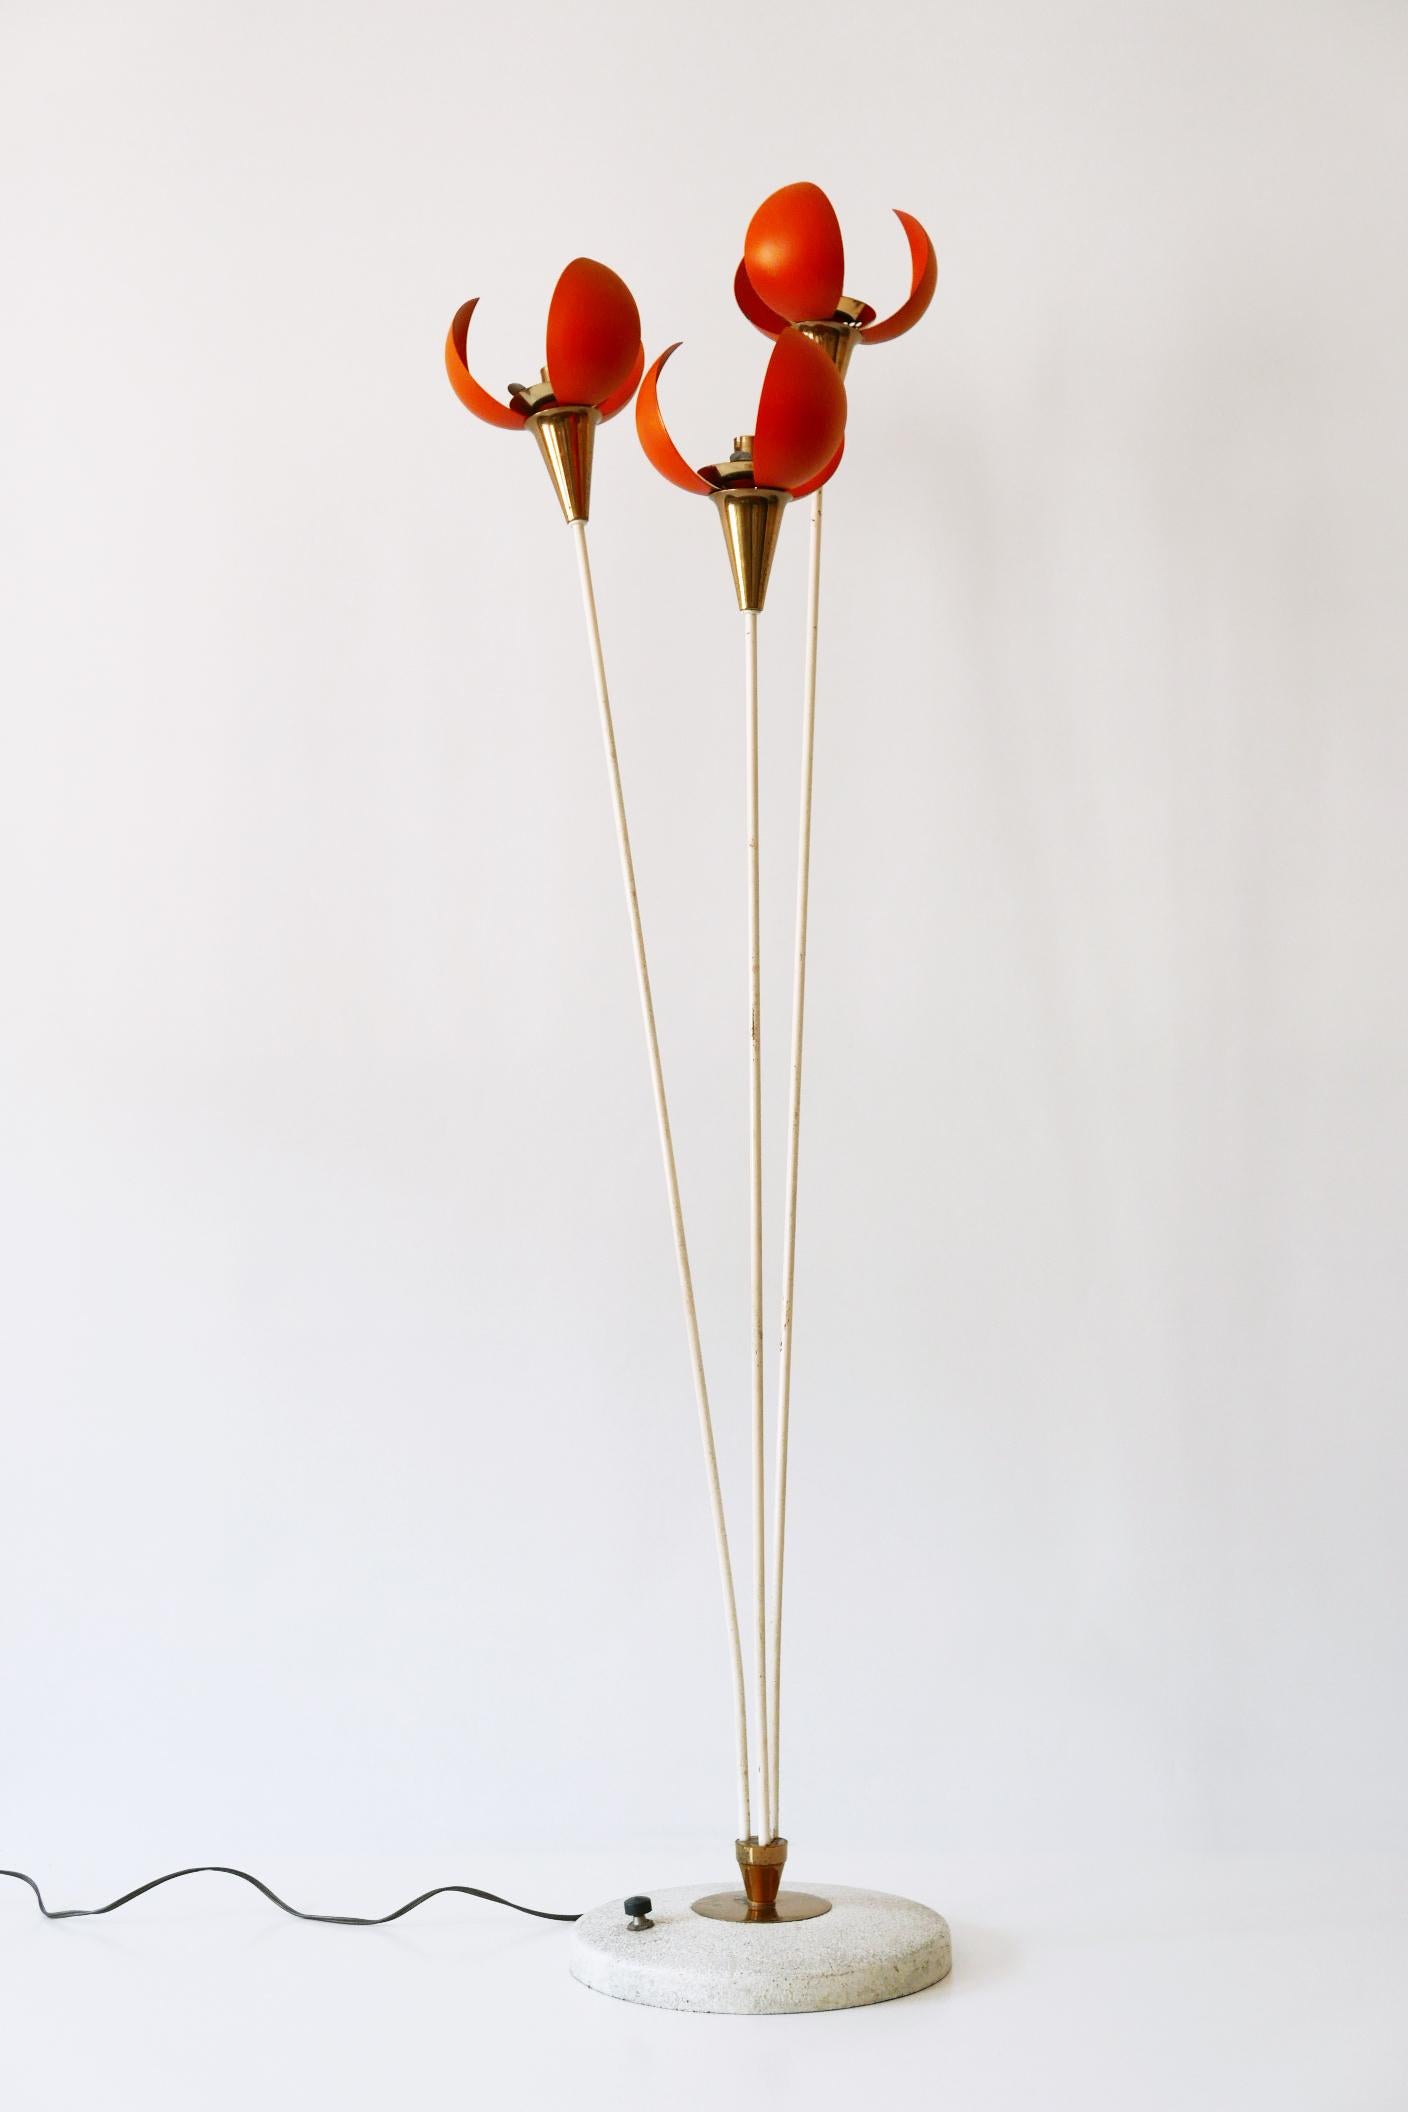 Amazing Mid-Century Modern Three-Flamed Floor Lamp Buds, 1950s, France For Sale 3